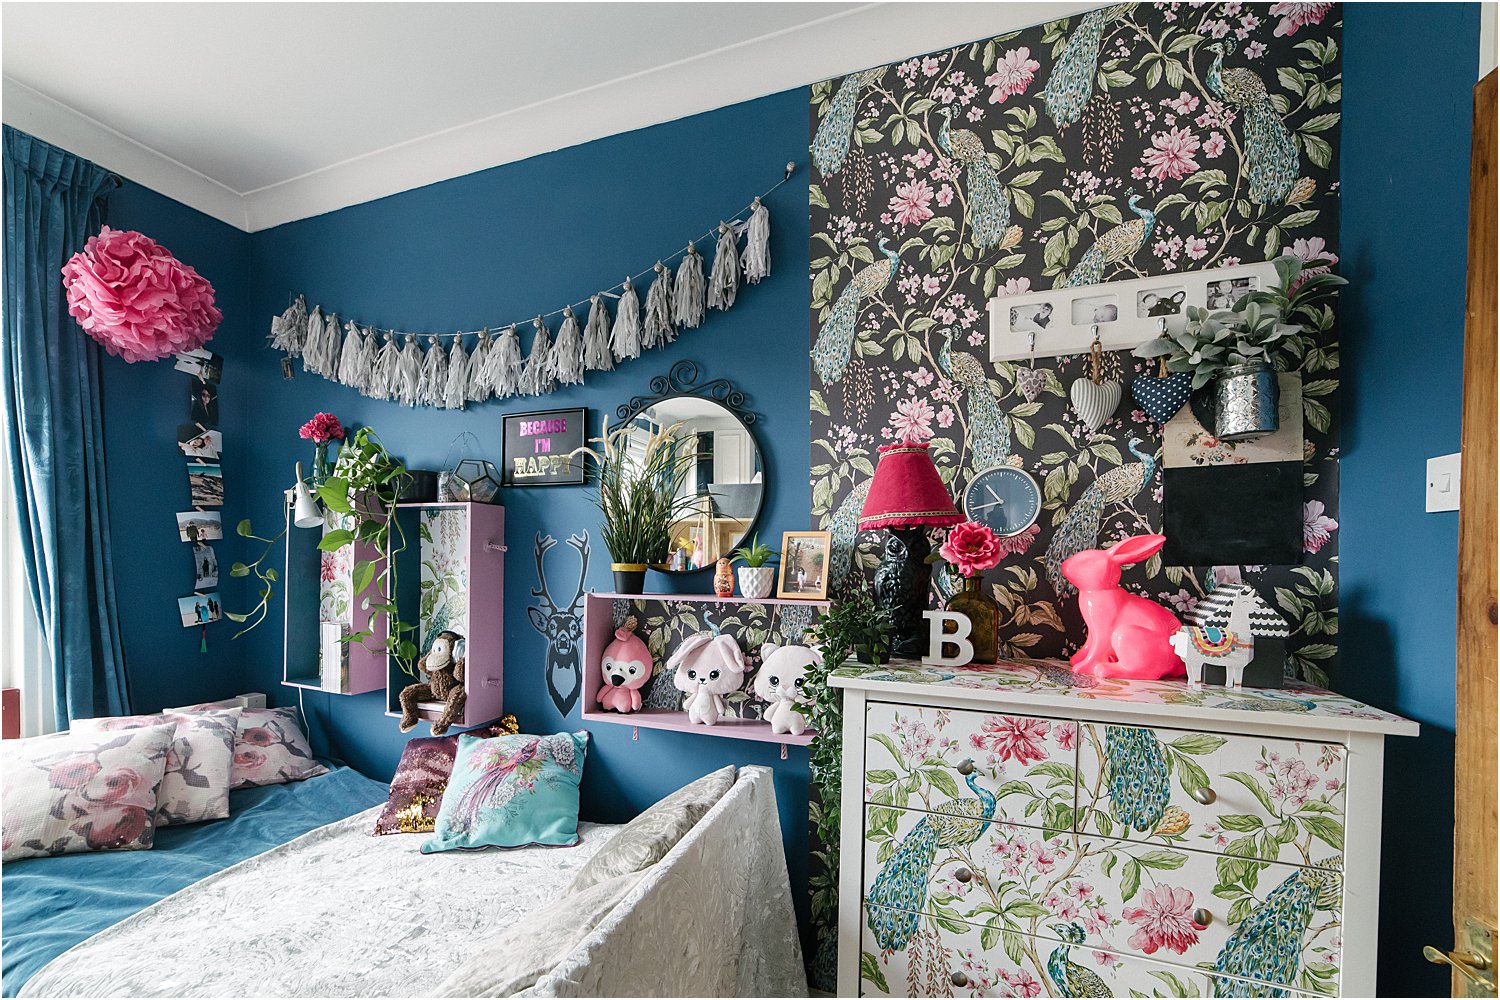 diy-upcycle-replace-dark-eclectic-maximalist-interiors-vintage-lily-sawyer-photo